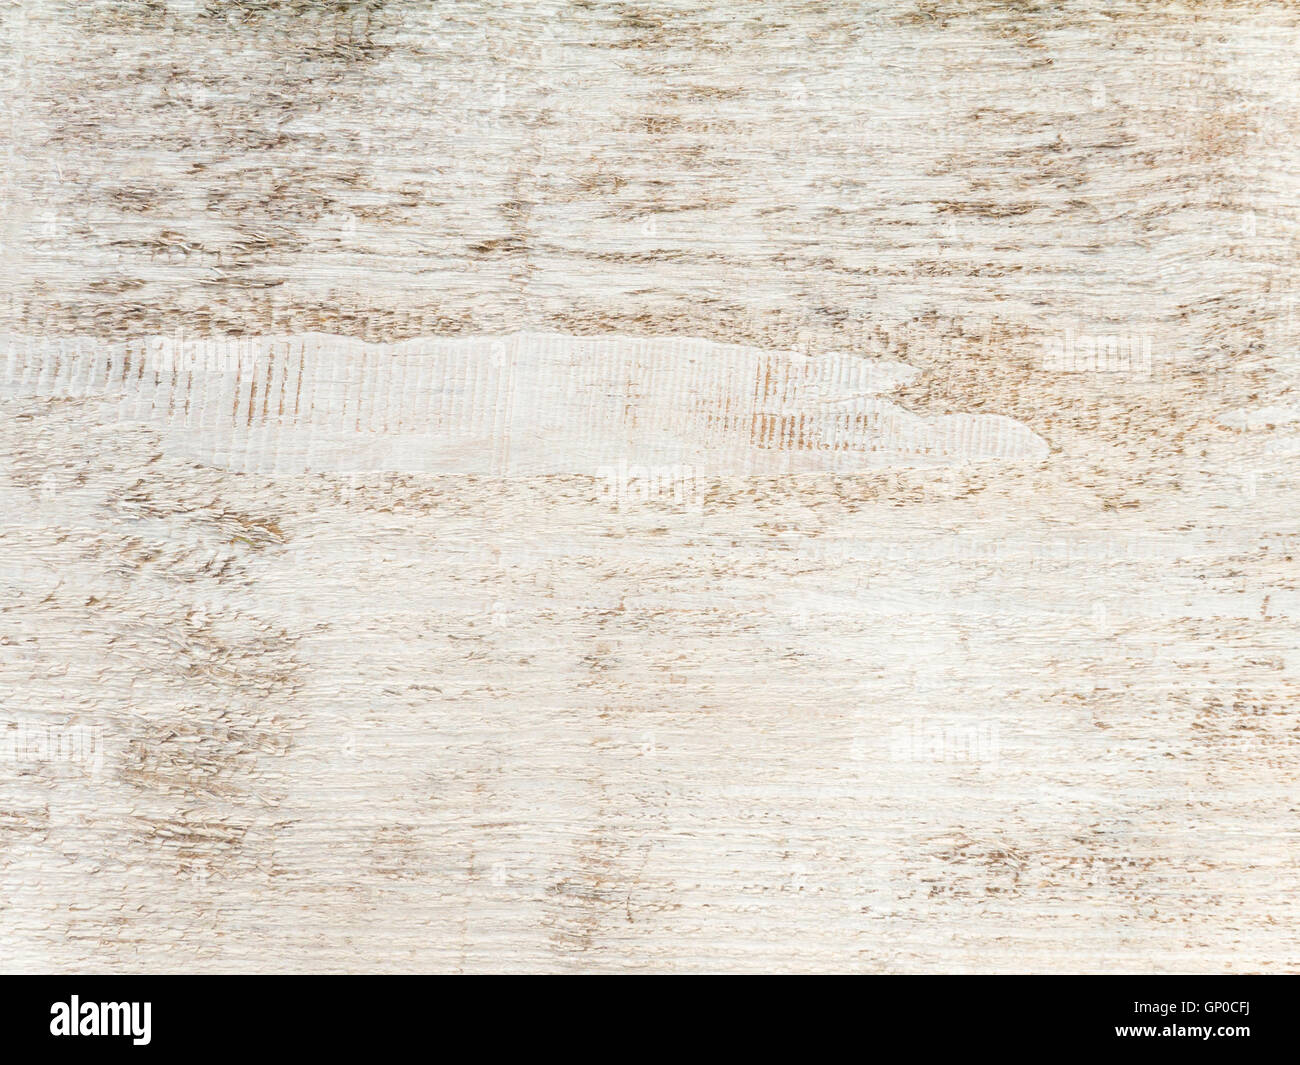 White rustic rough painted wooden board background Stock Photo